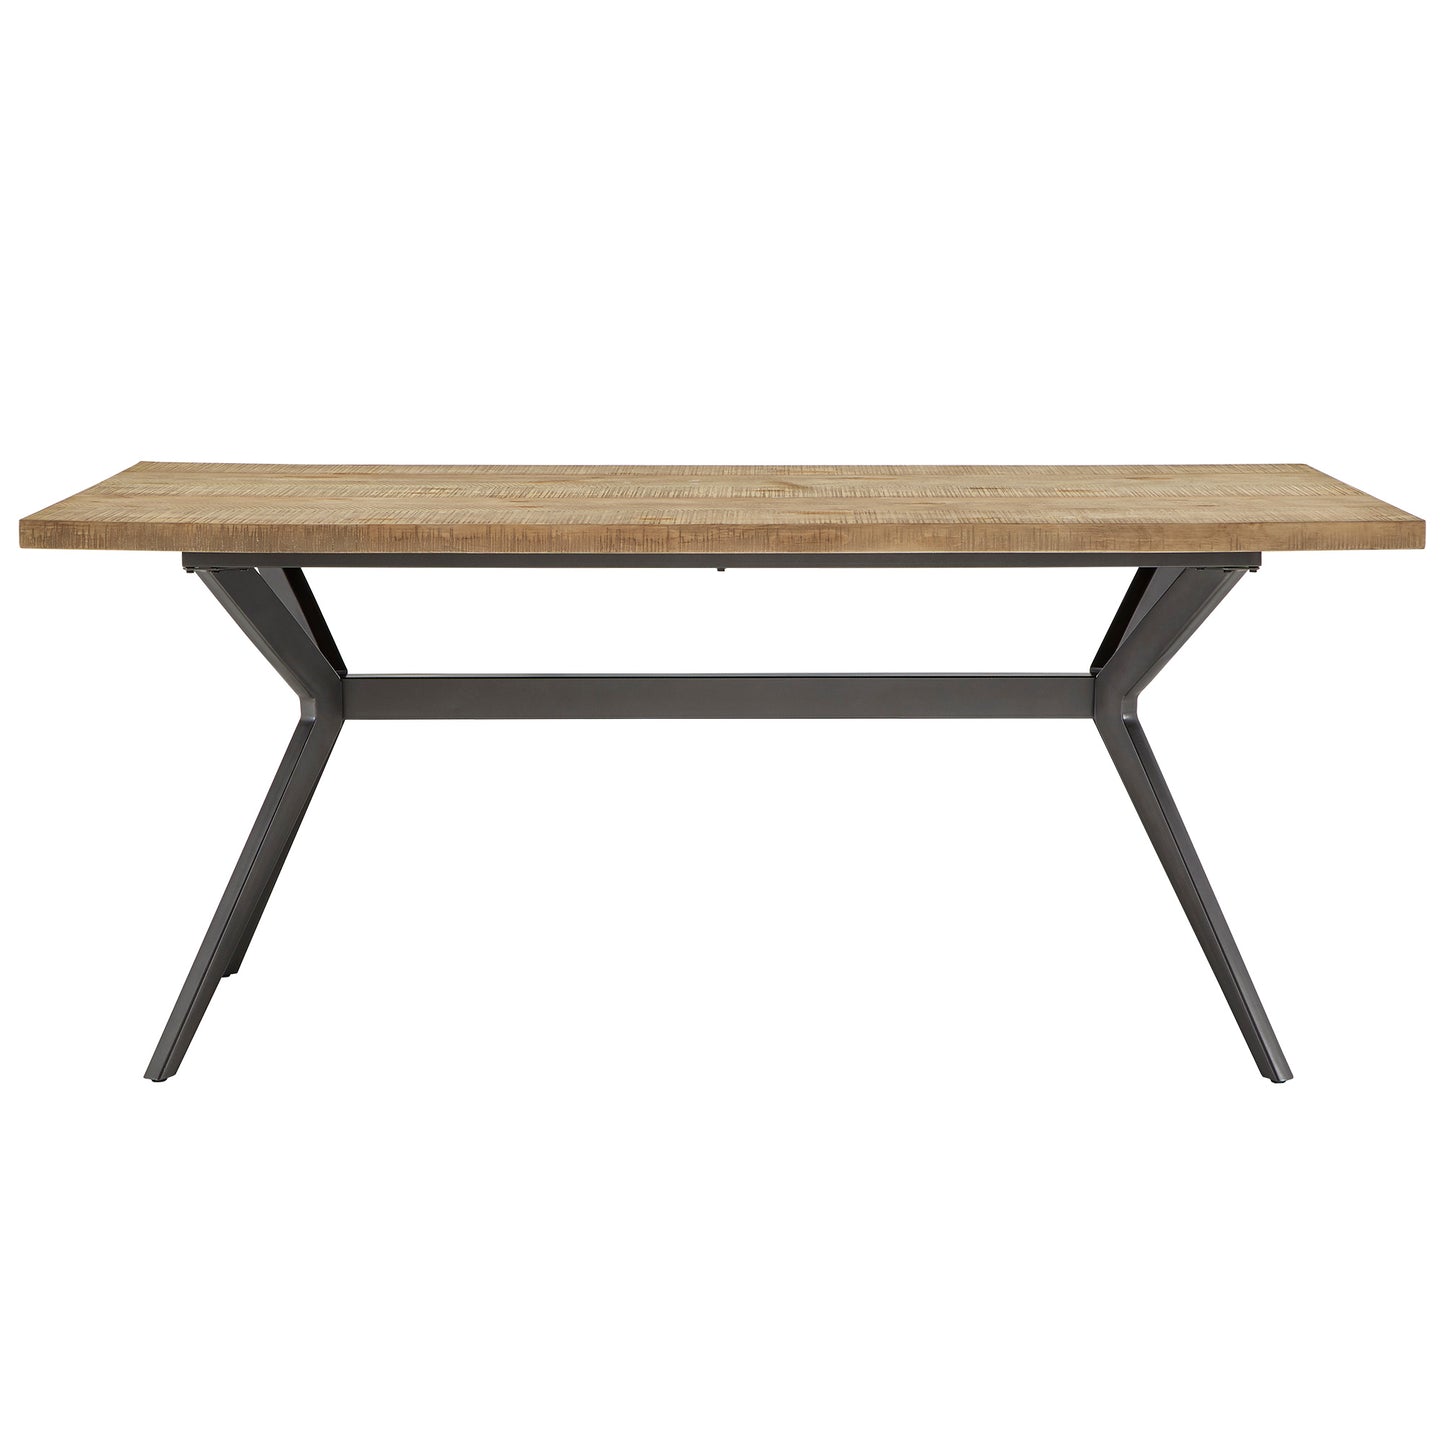 70" Iron Grey Metal Base 4-6 Person Dining Table - Light Pine Finish Top